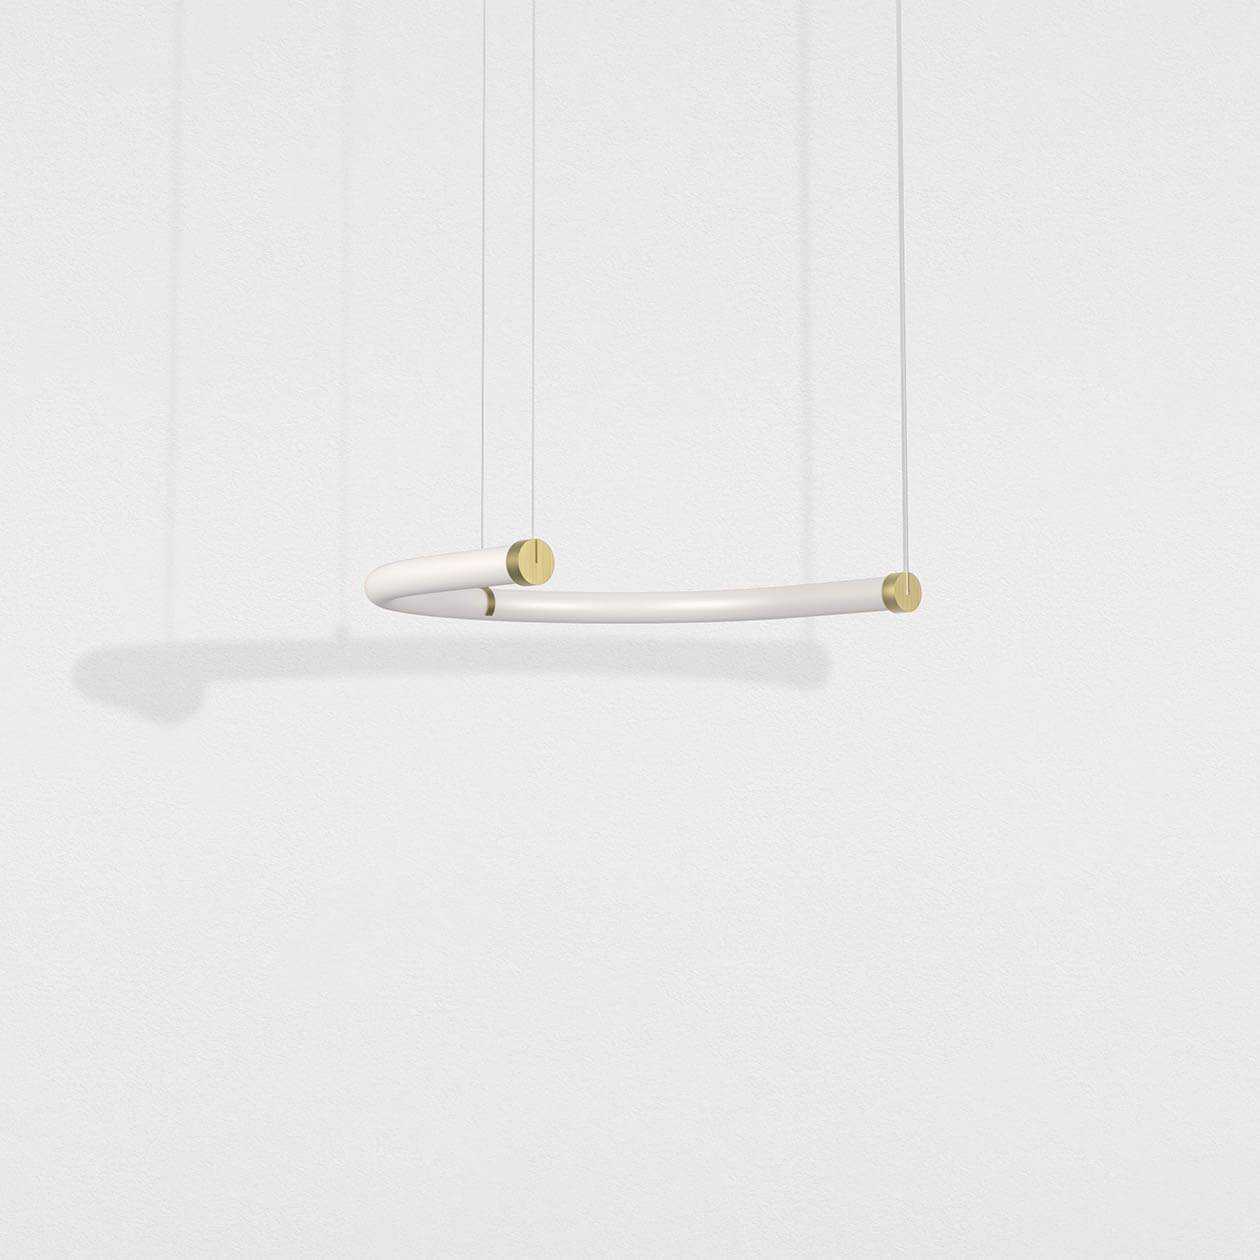 Pendant lamp U Unseen - 3 wires side view